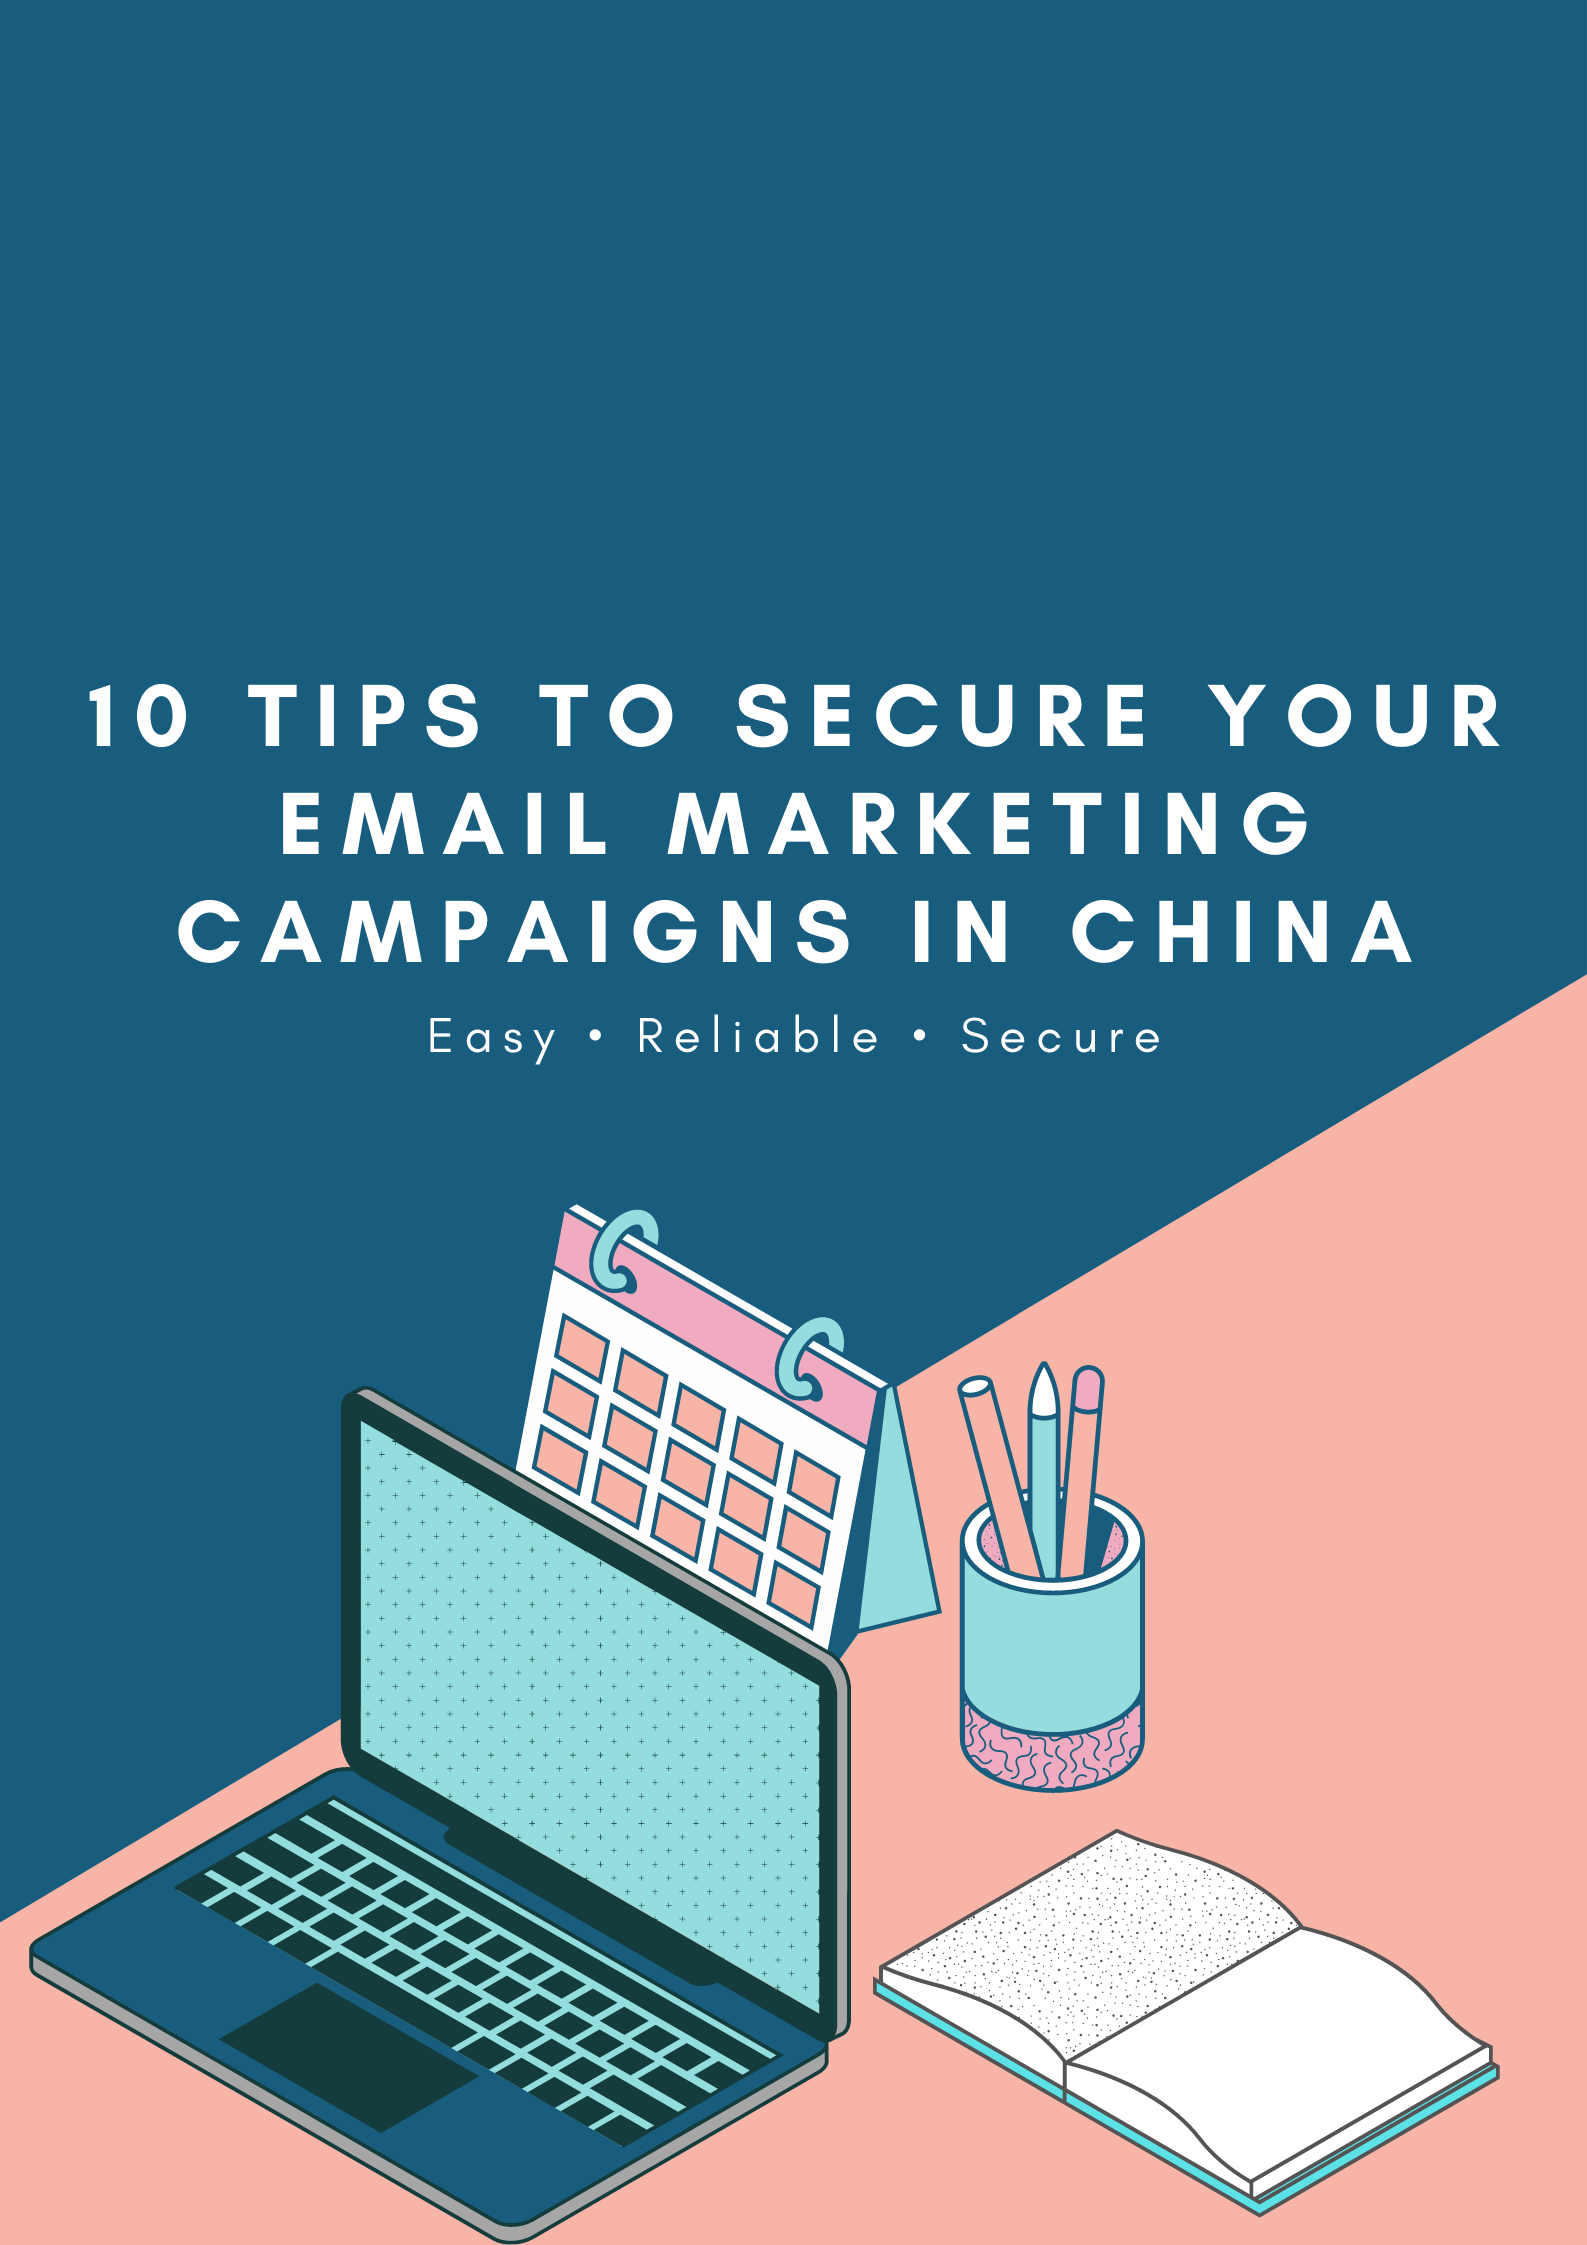 10 tips to secure your email marketing campaigns in China